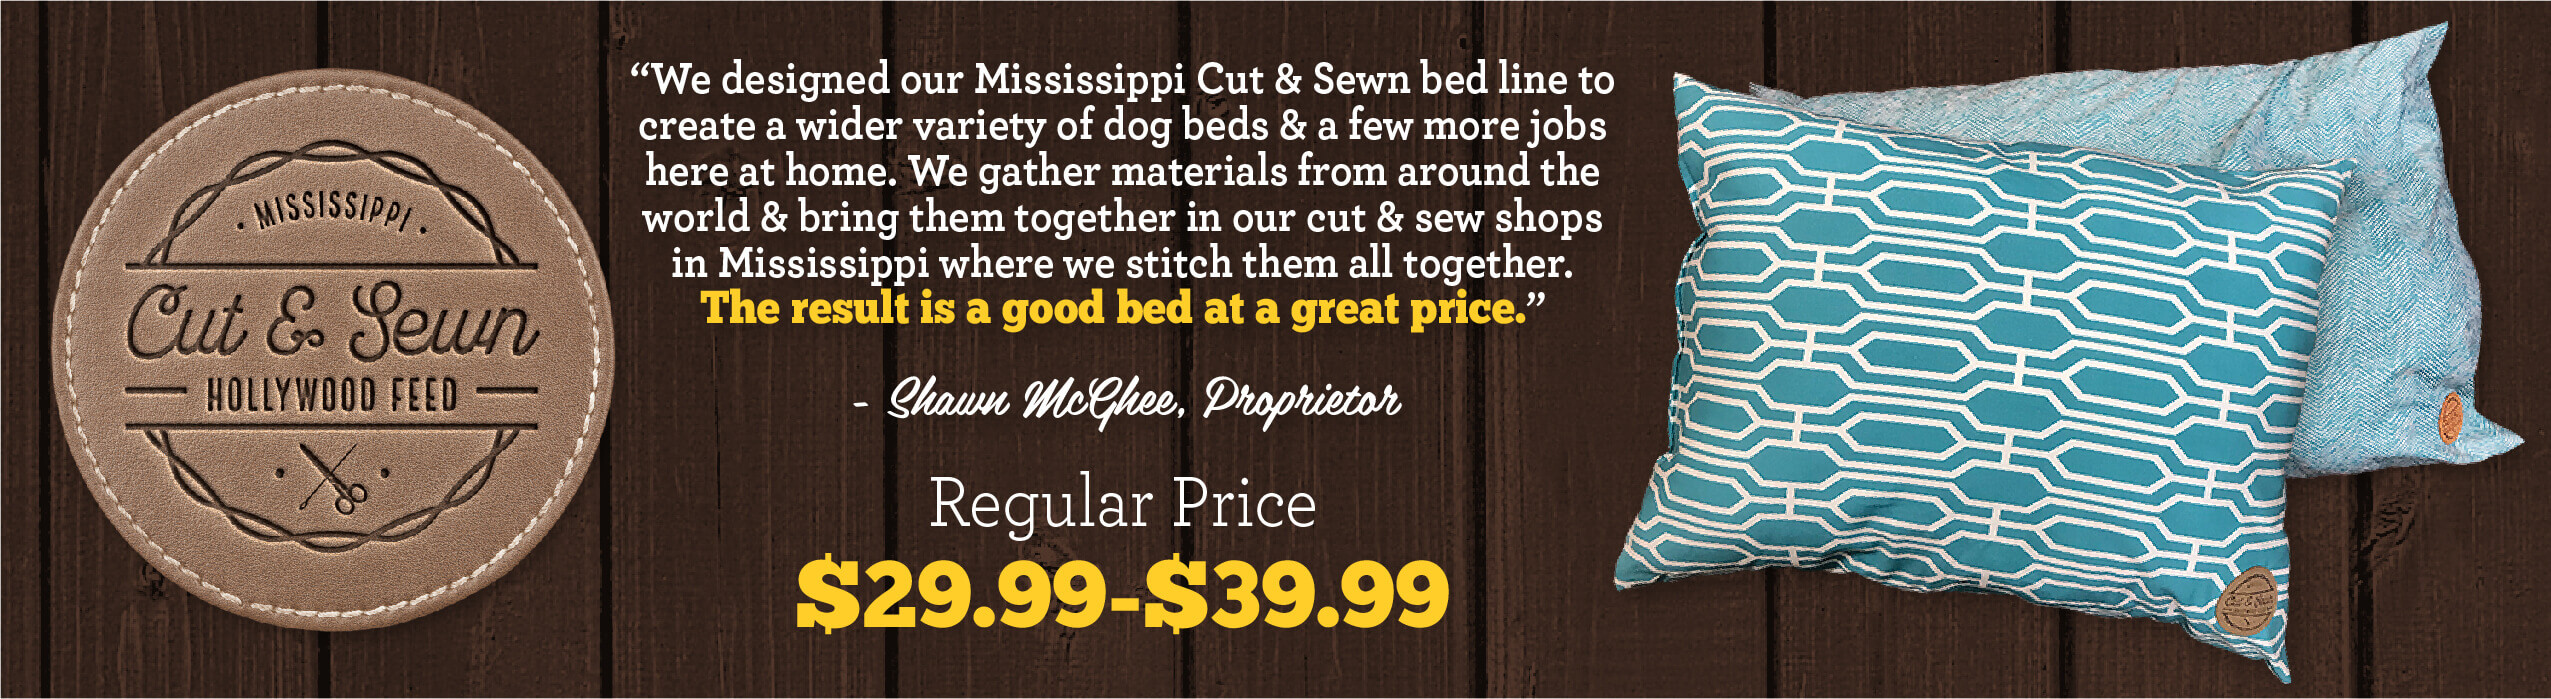 Cut and Sewn in Mississippi Pillow Beds